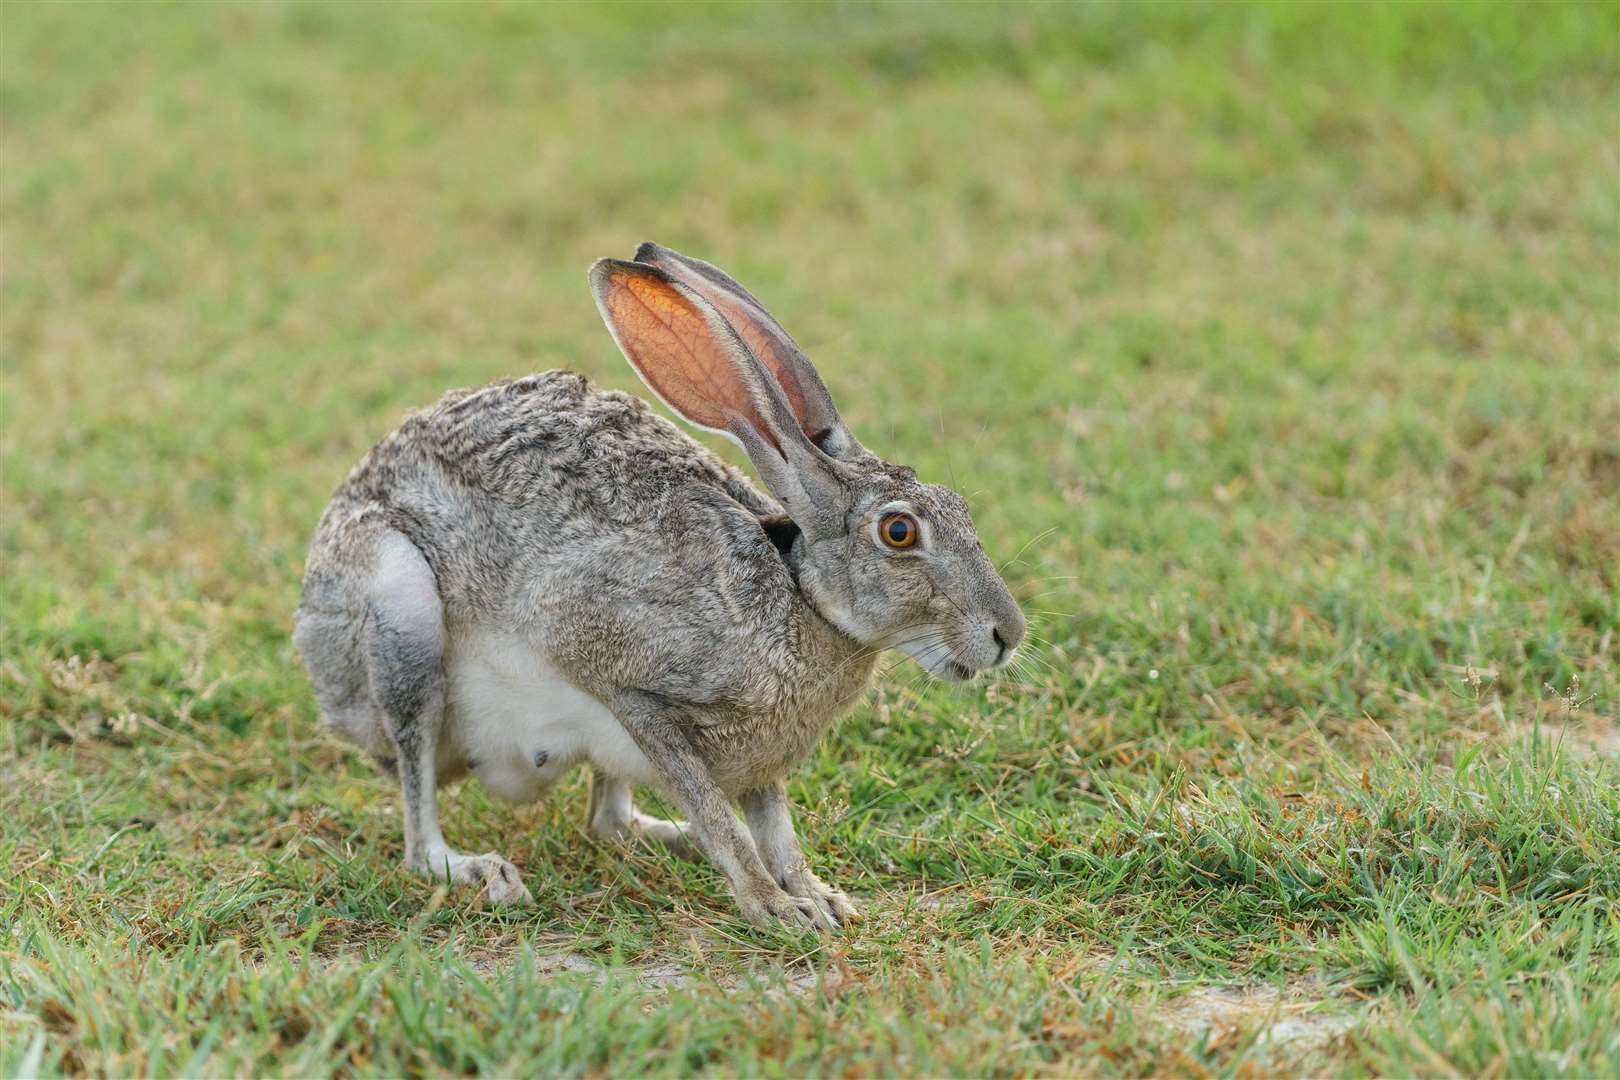 Hares are still seen as the Easter animal in northwestern Europe, but most other cultures recognise the Easter Bunny